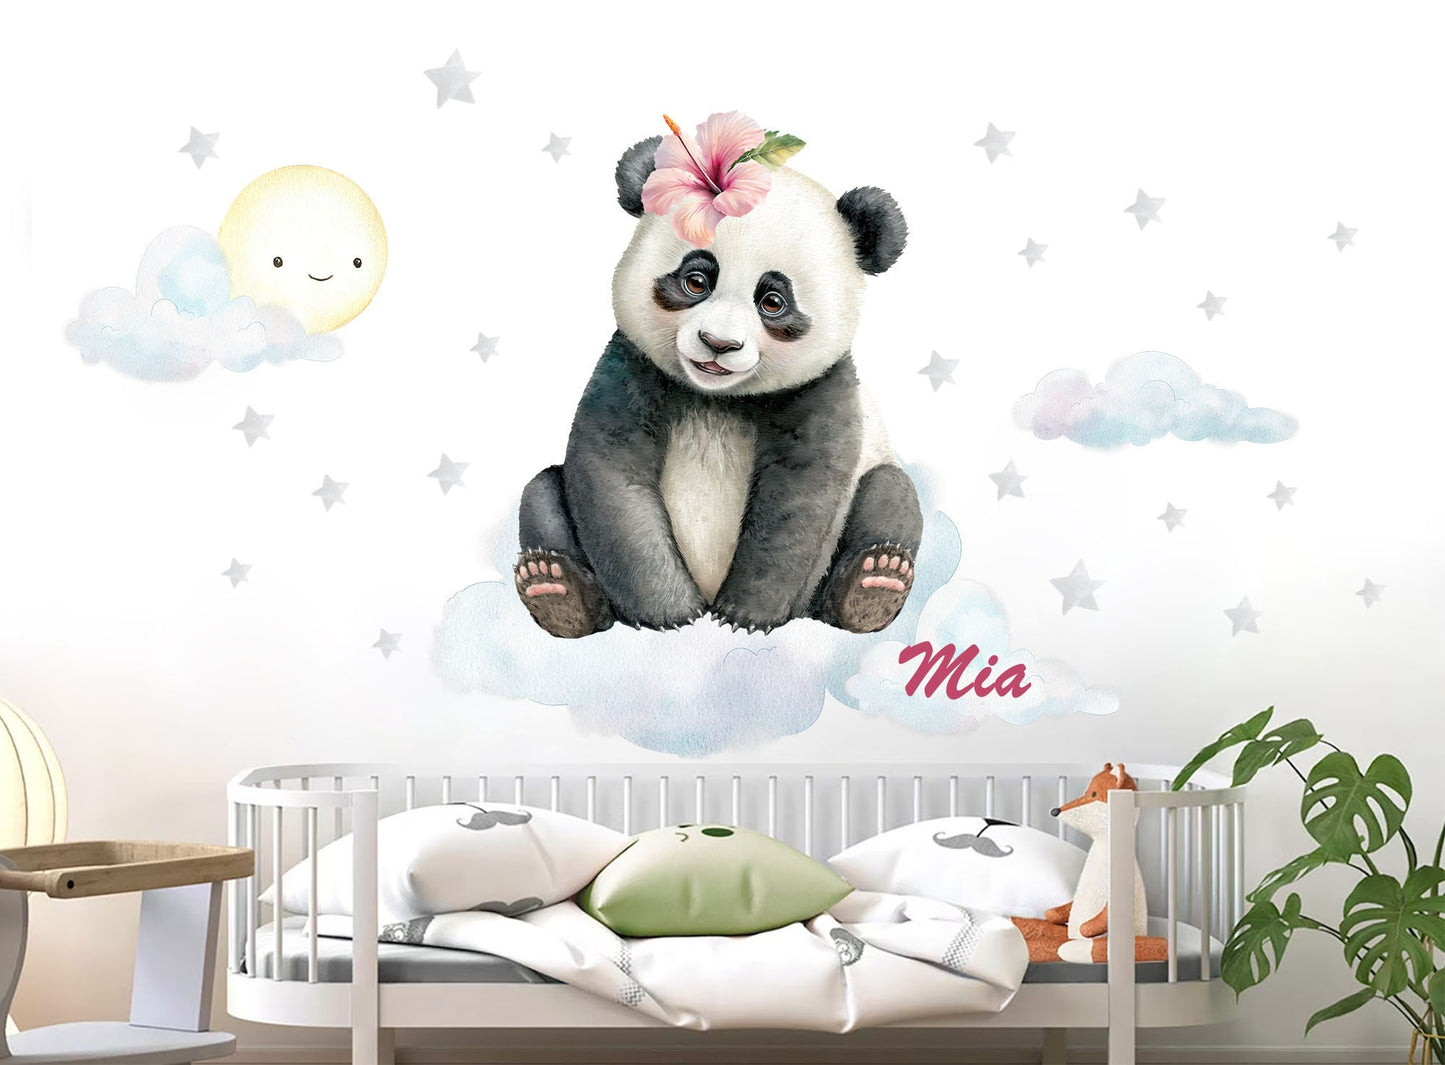 Customizable Name Panda Baby Wall Decal - Panda with Flower Crown Sitting on Clouds - BR359